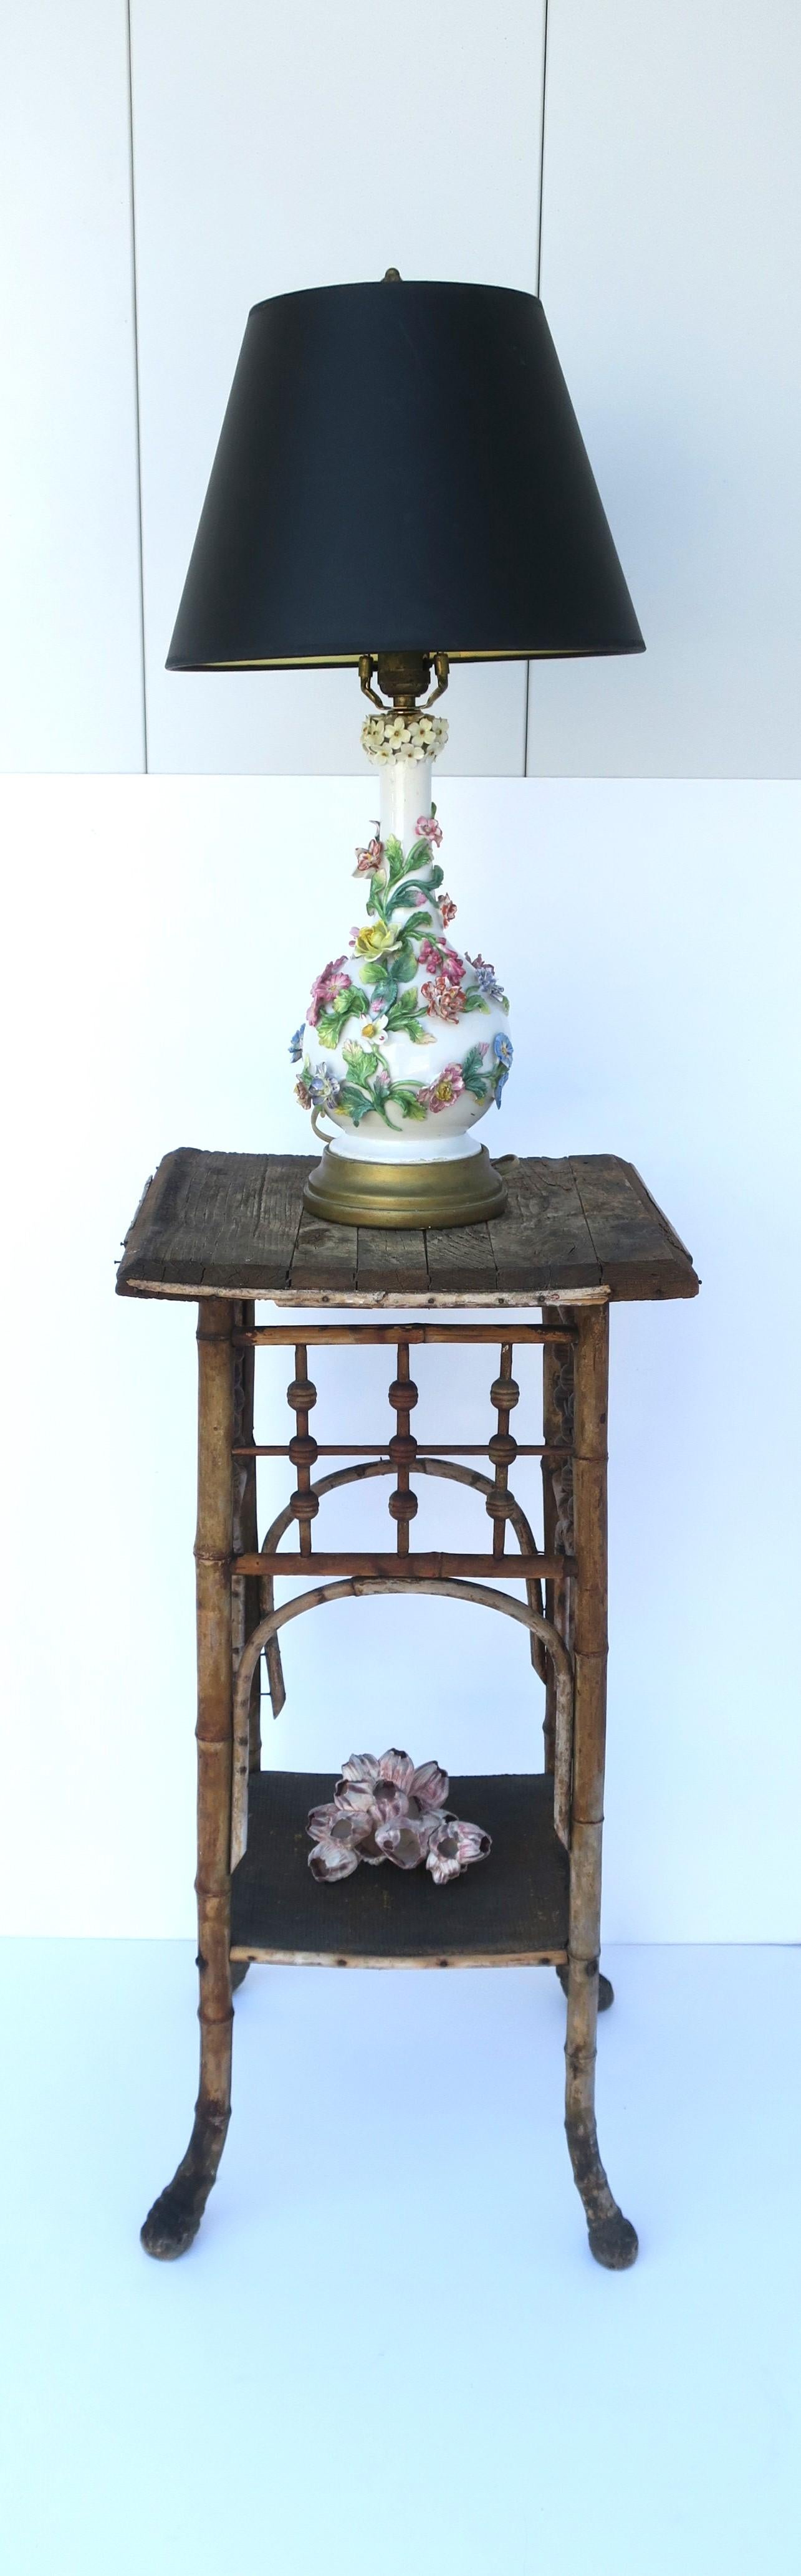 Italian White Porcelain Lamp with Colorful Flowers, Leaves & Vines Capo di Monte For Sale 1